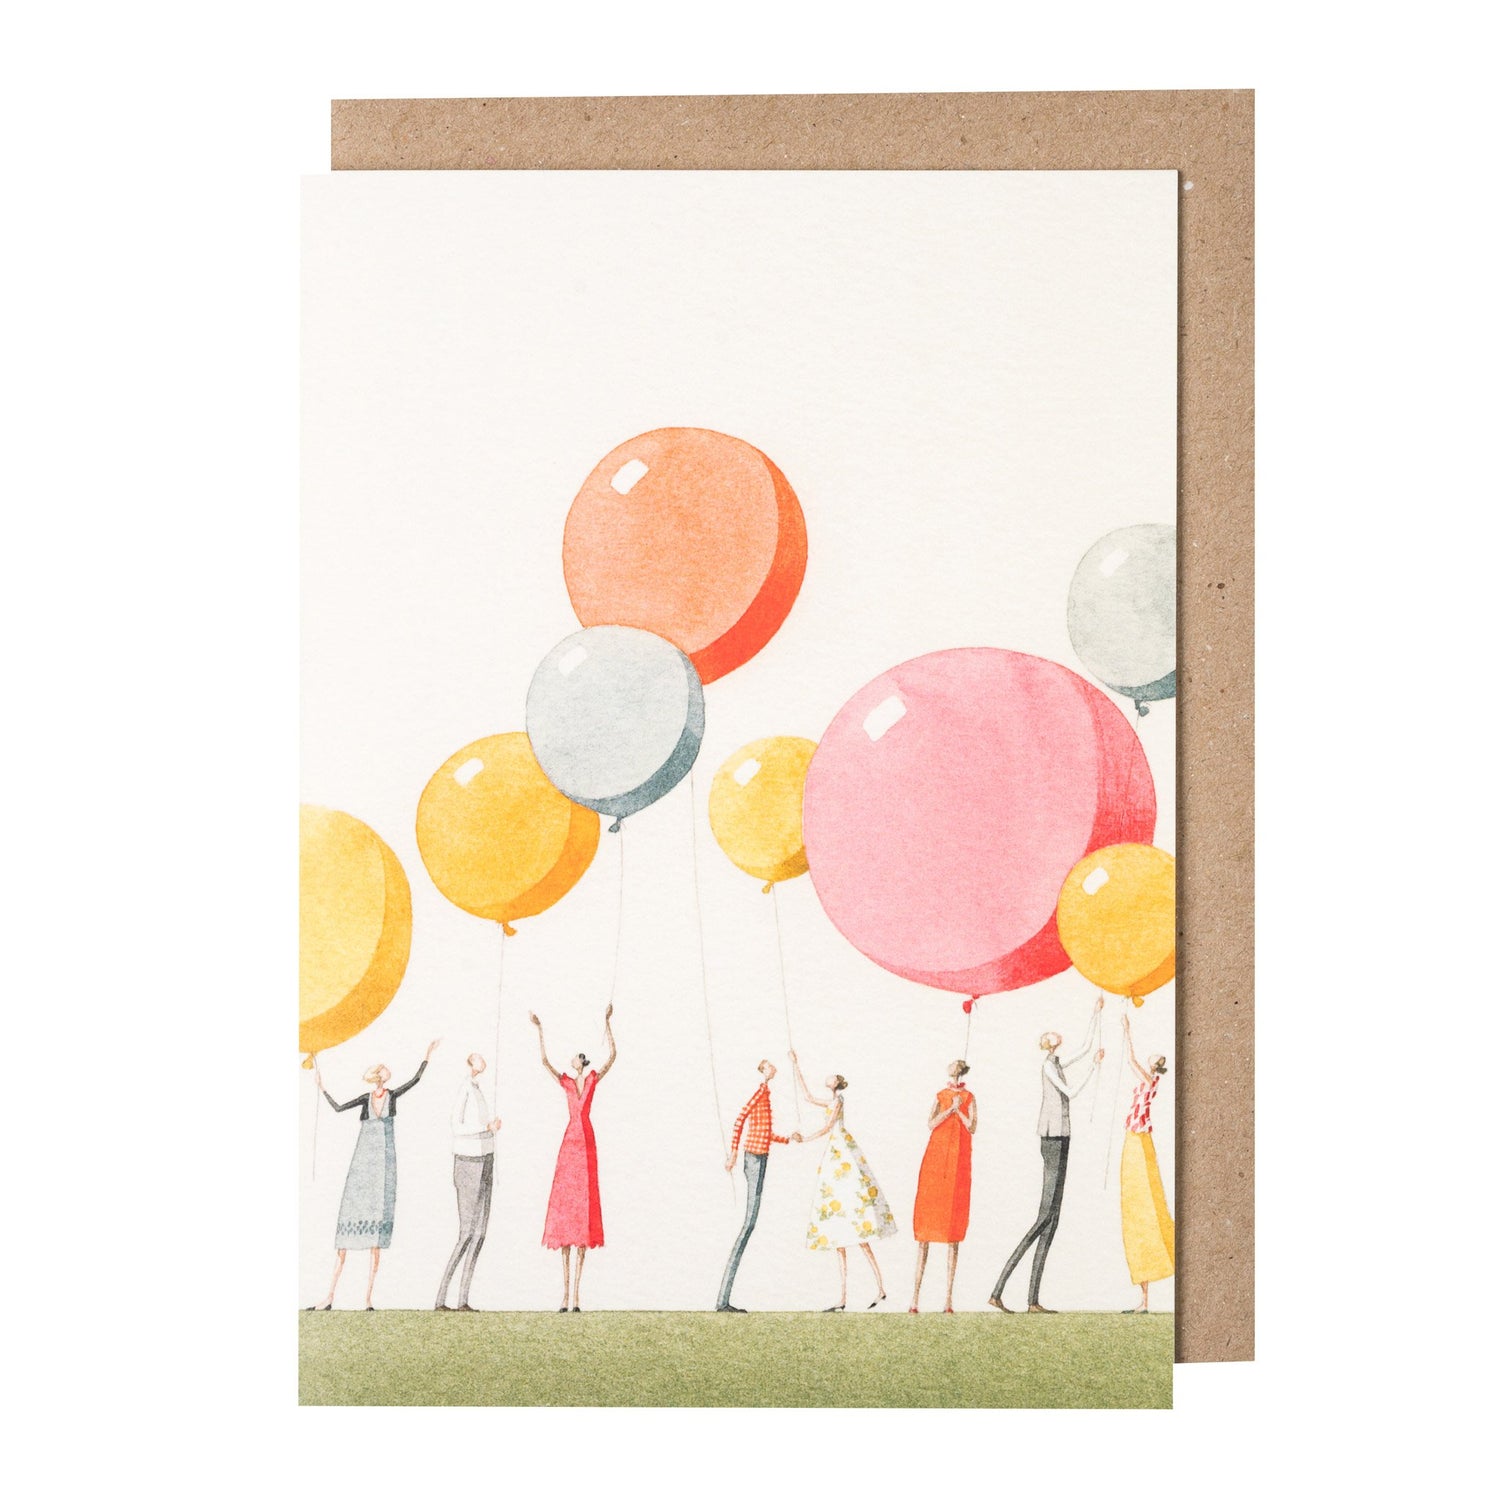 environmentally sustainable paper, compostable packaging, recycled paper, made in england, illustration, balloon, balloon party